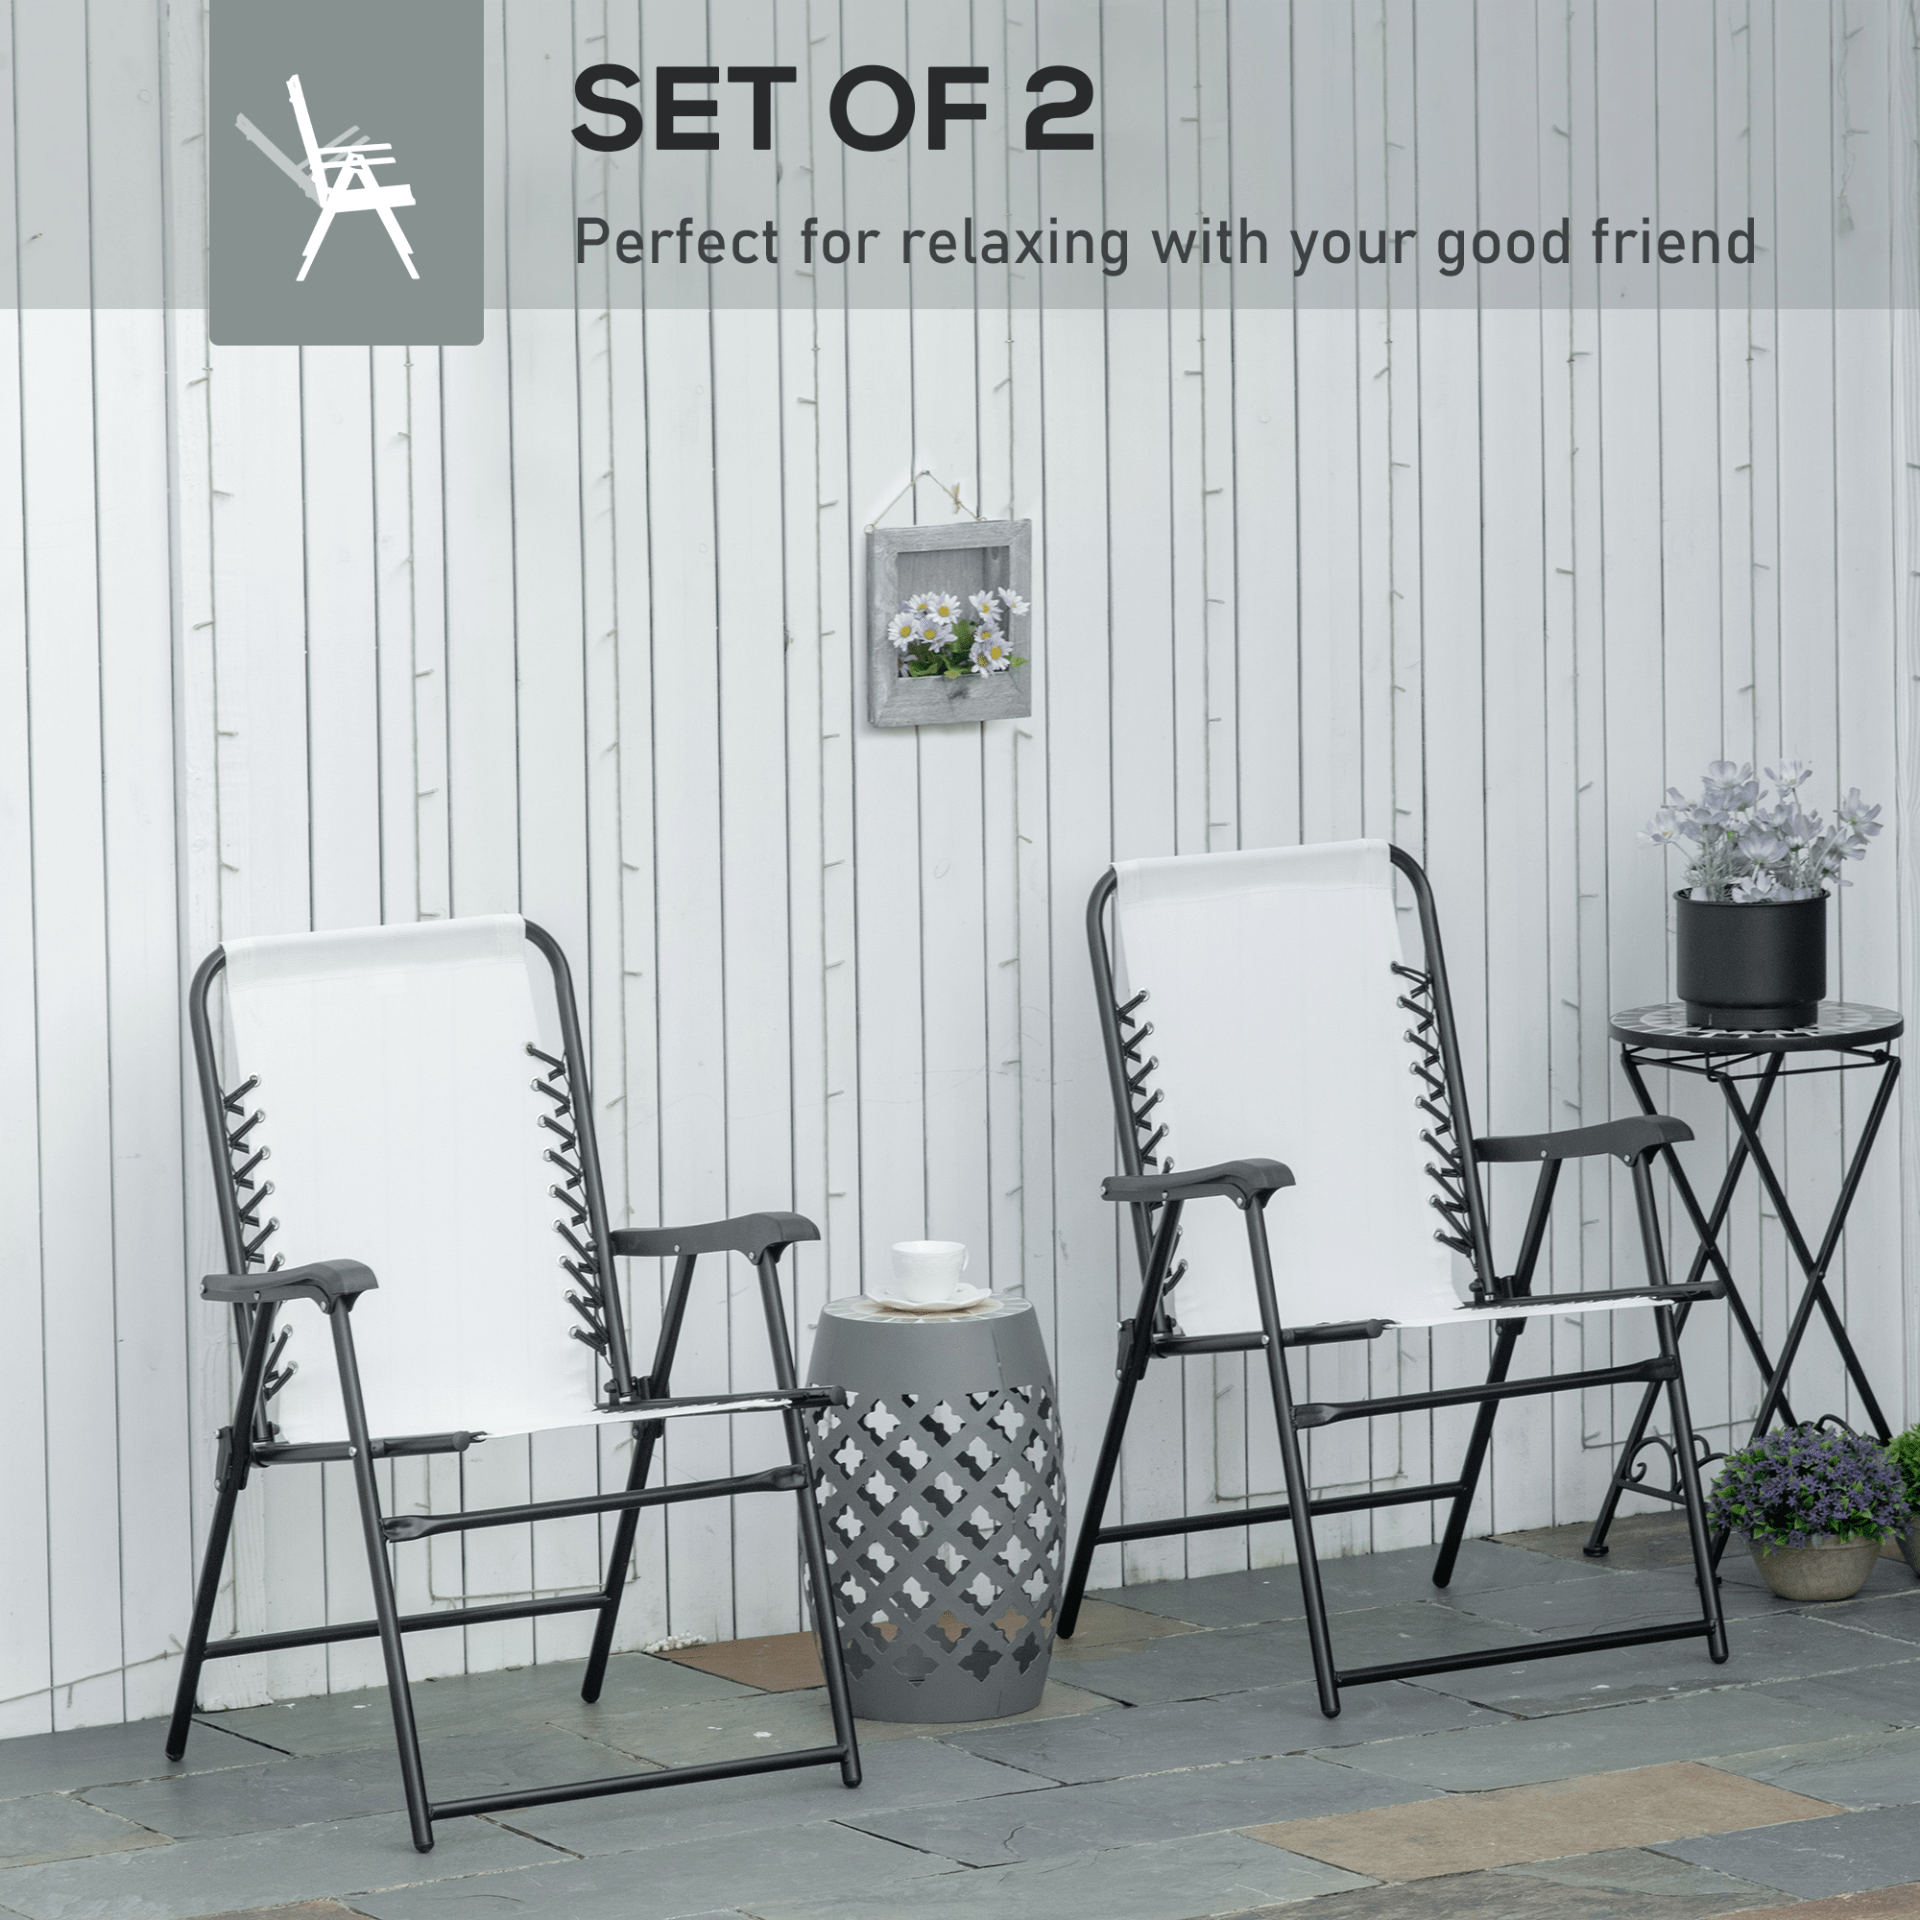 Outsunny Set of 2 Patio Folding Dining Chair Set Garden Outdoor Portable for Camping Pool Beach Deck Lawn with Armrest, Cream White Camping Chair Cosy Camping Co.   